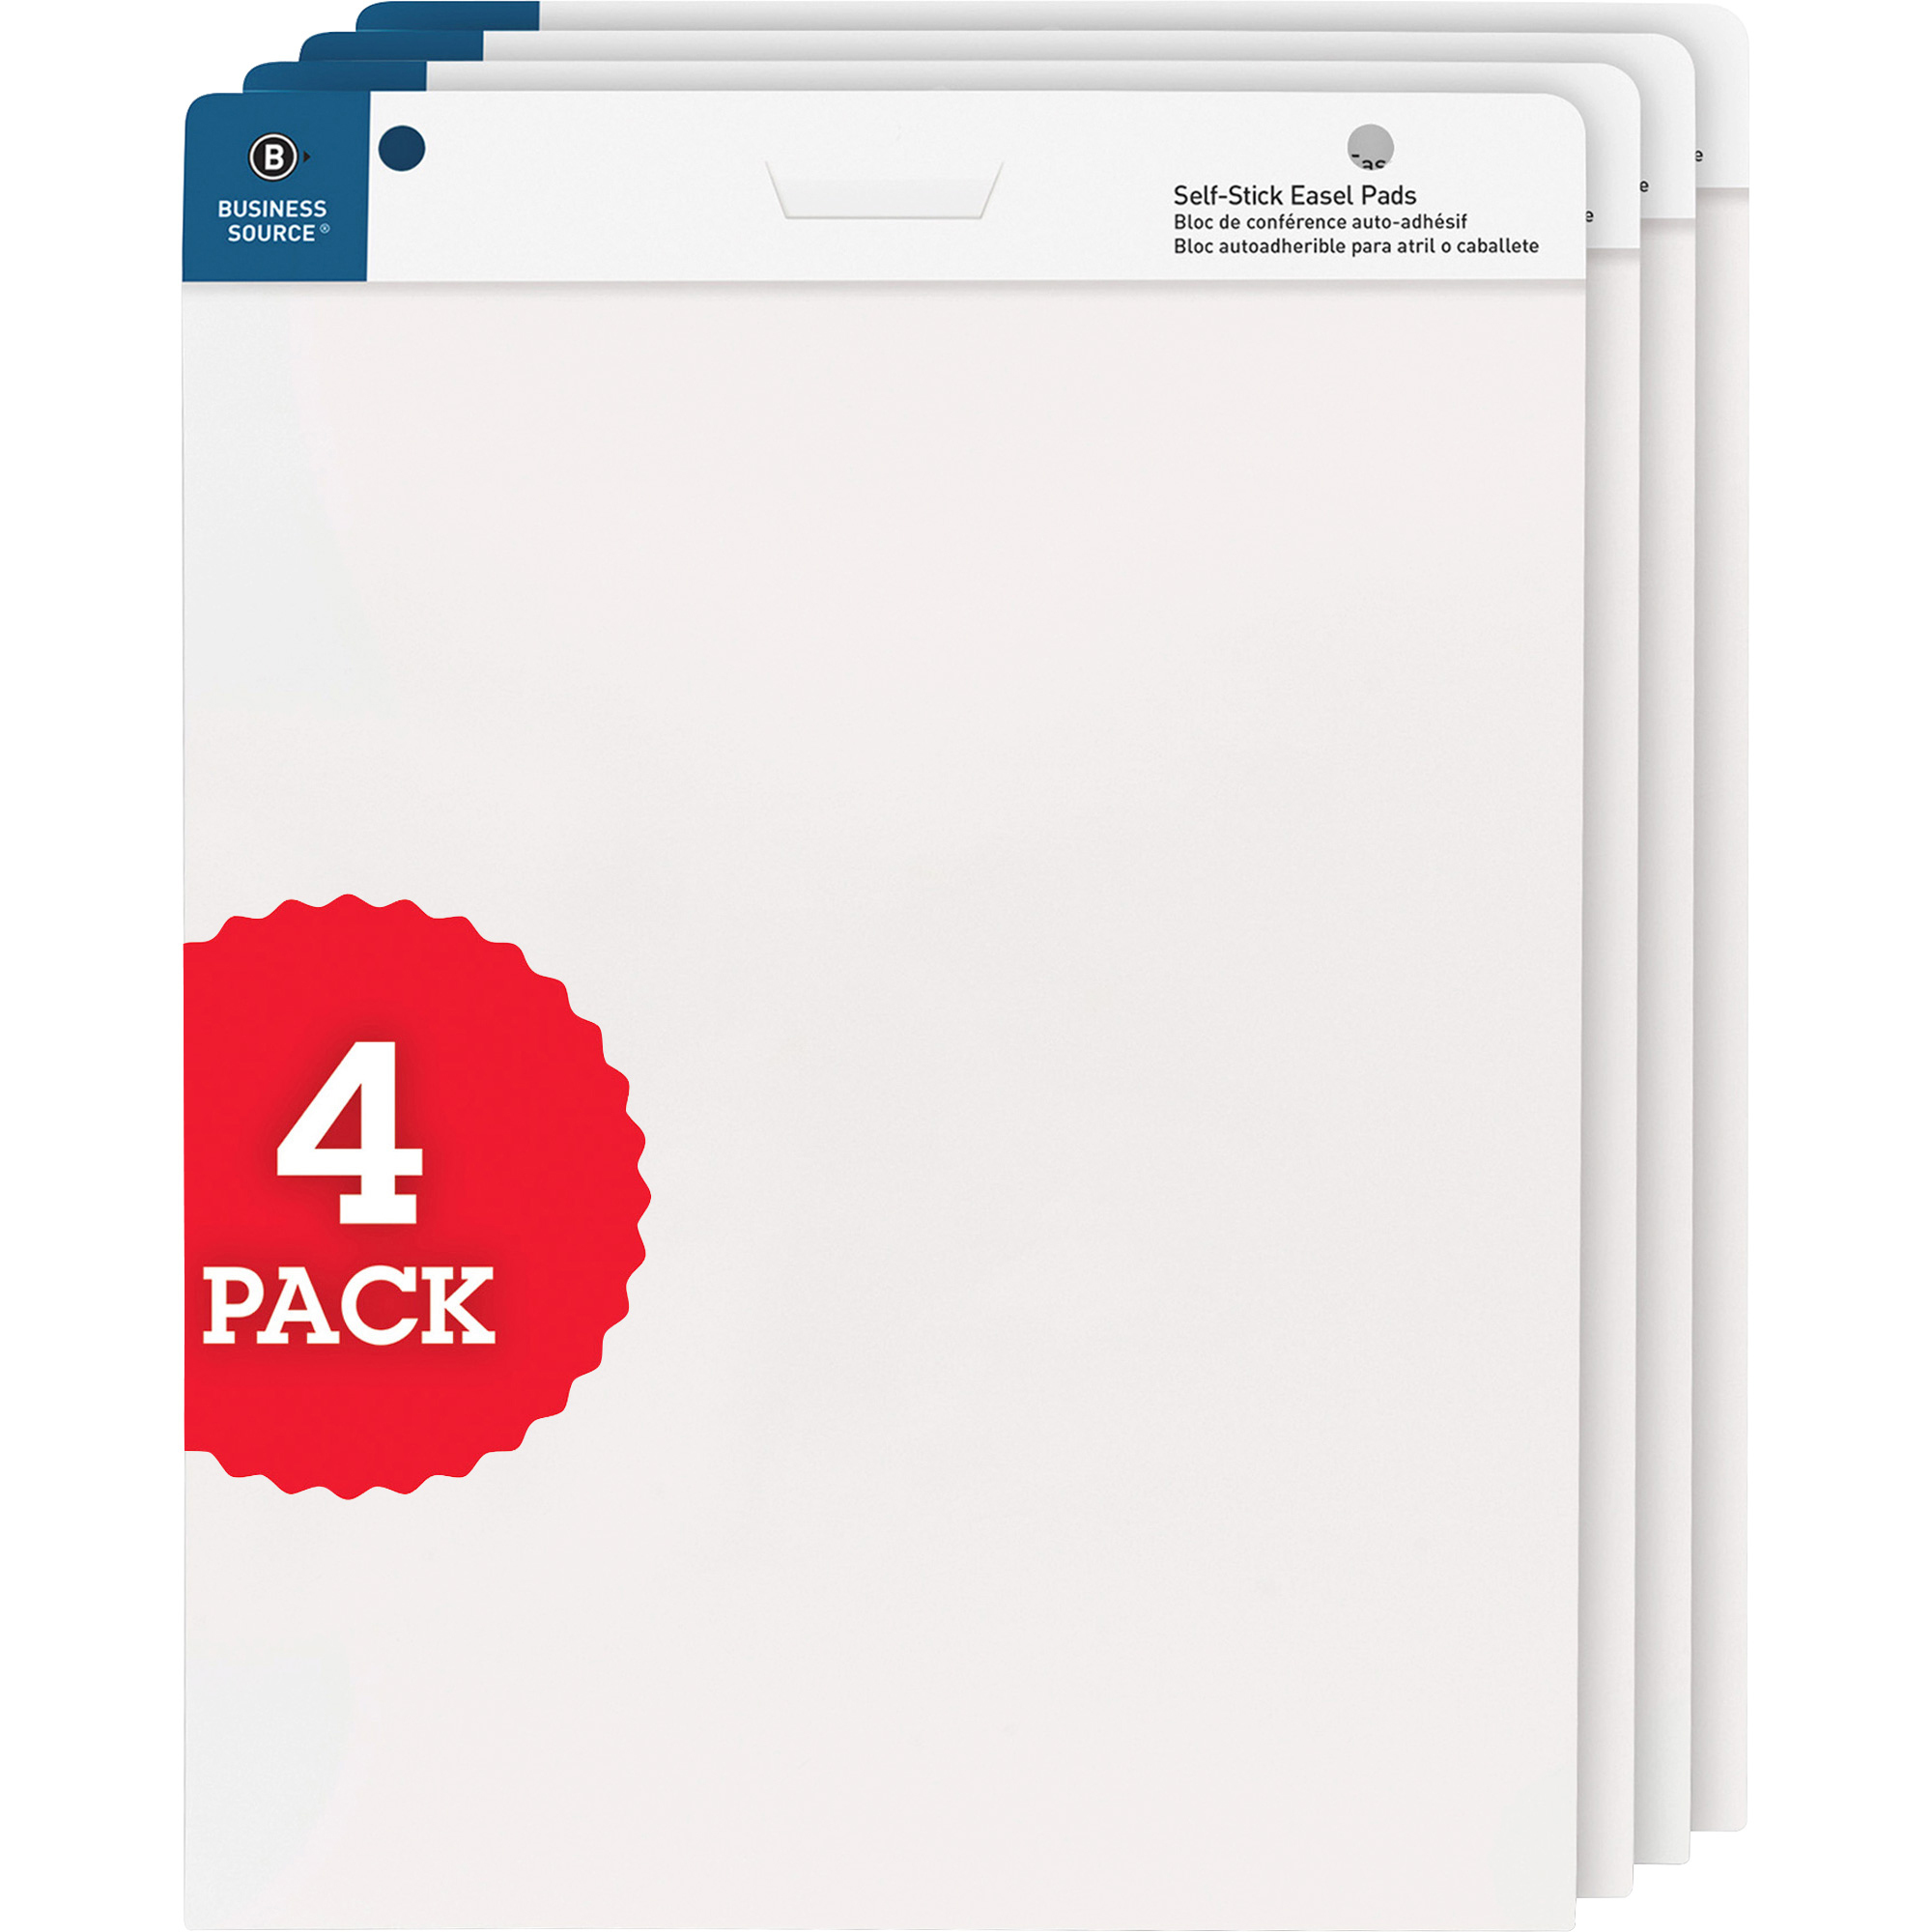 Post-it Self-Stick Easel Pads 25 x 30 White 30 Sheets 8/Pack